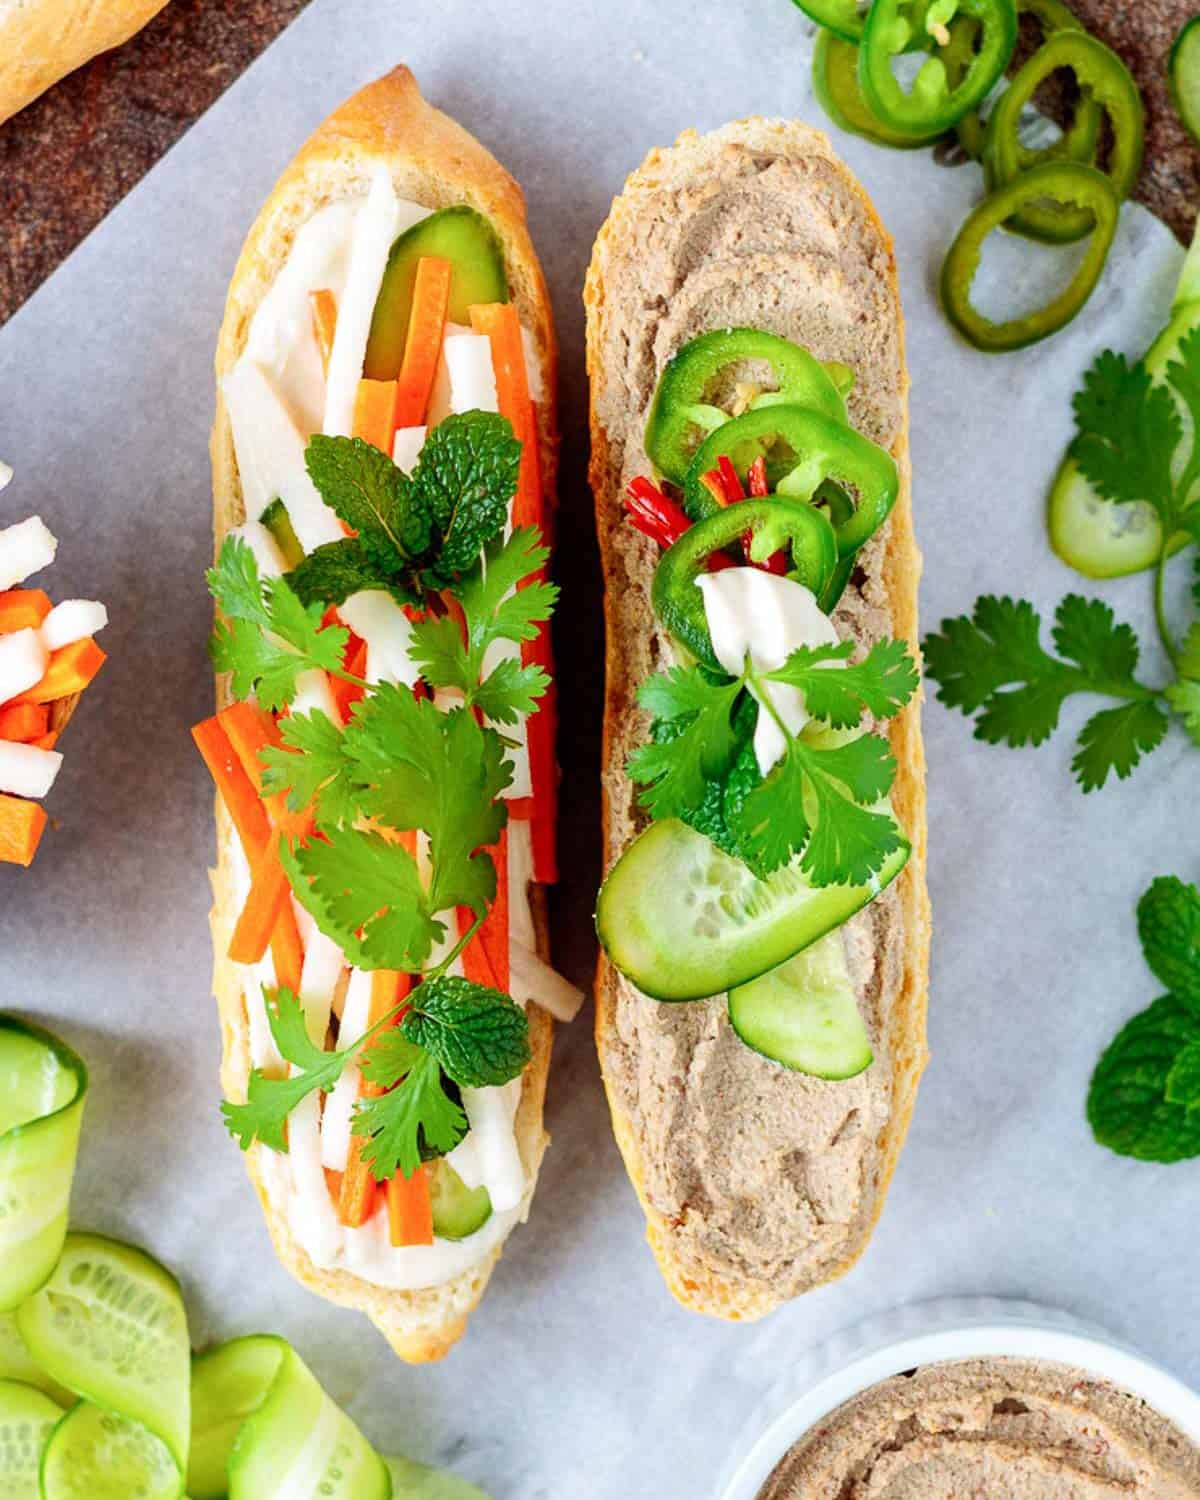 Pate spread on a Vietnamese-style sandwich with pickled carrots and herbs.